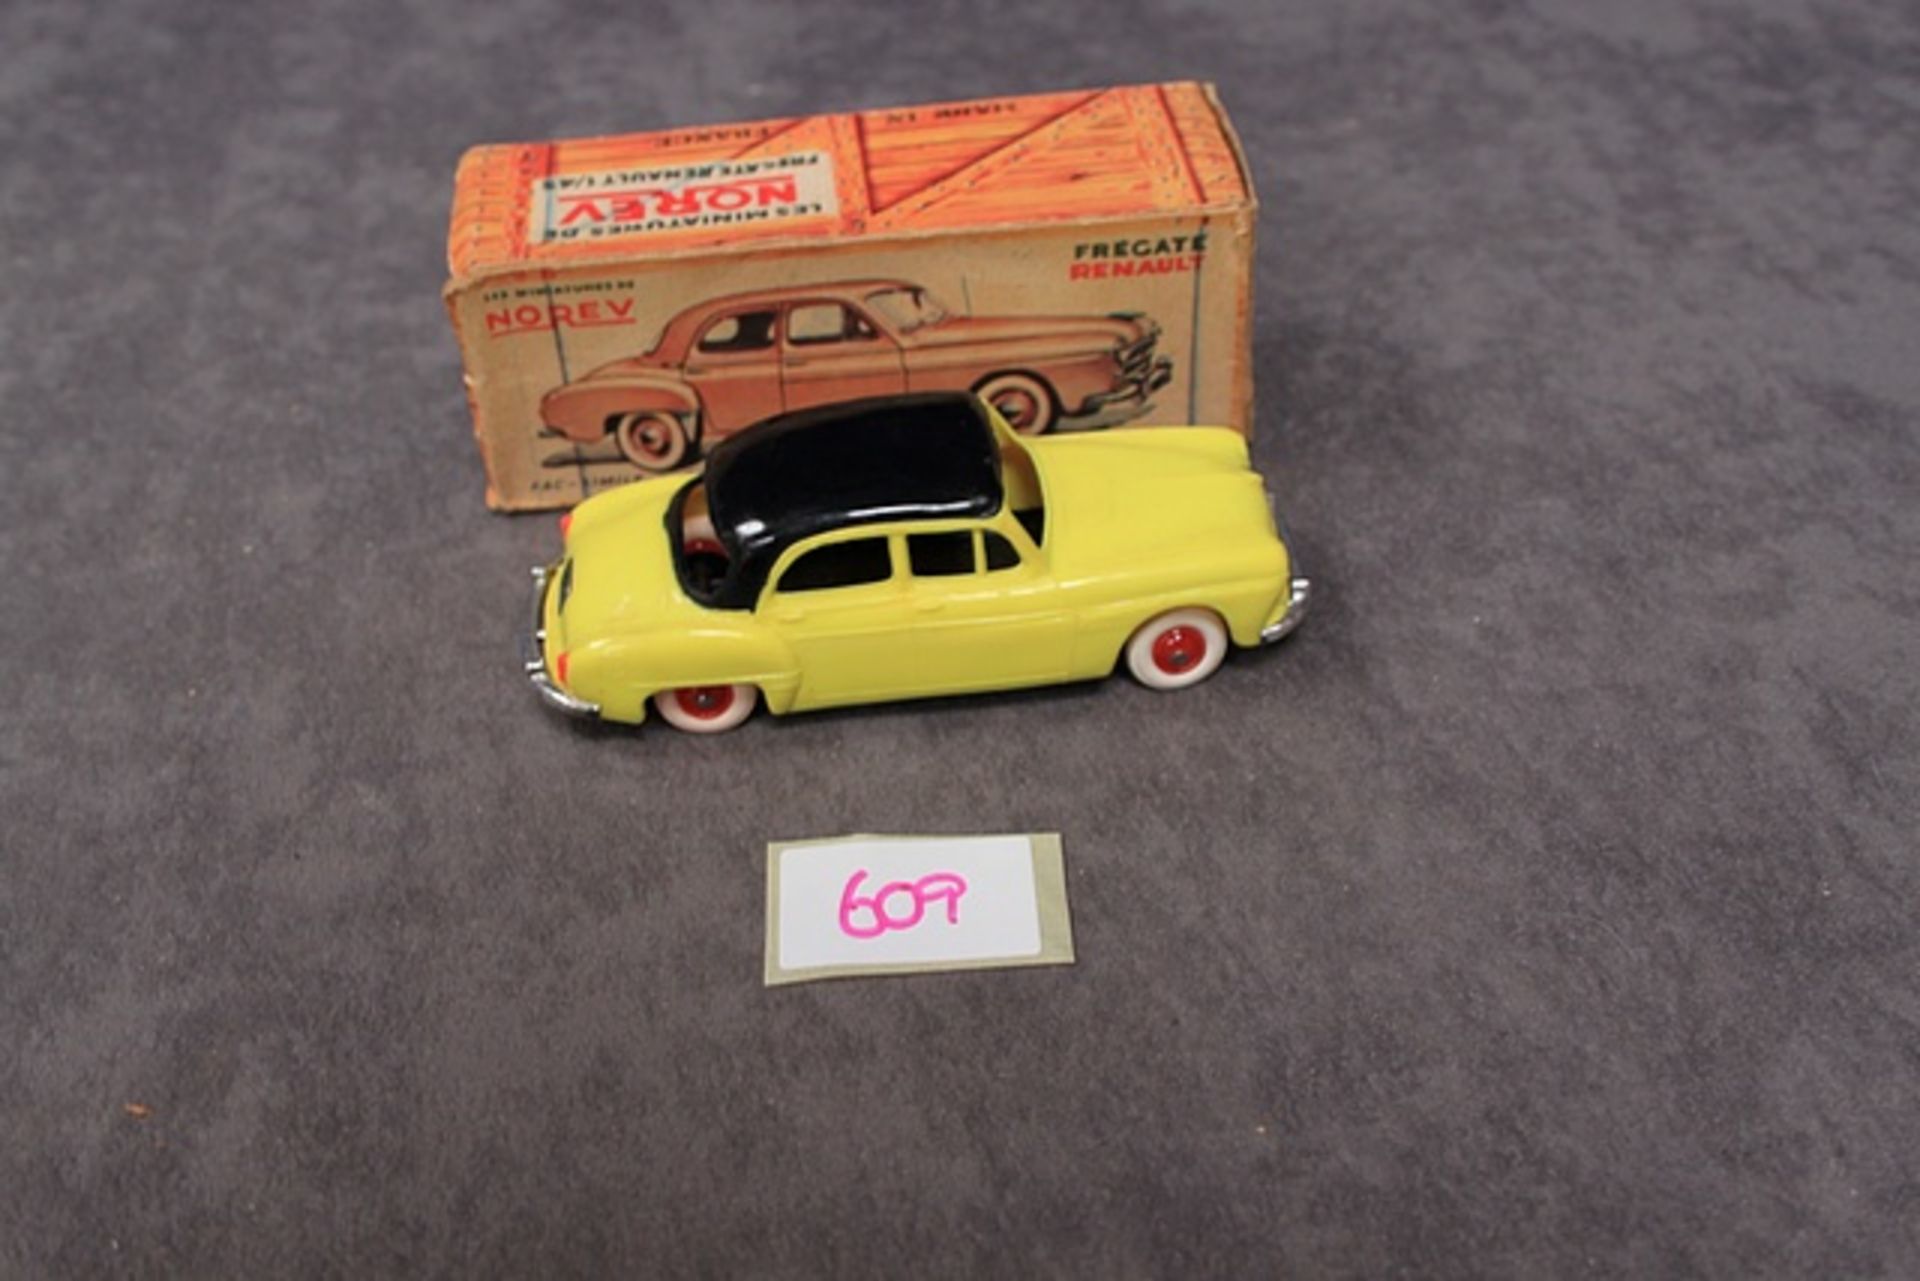 Norev ( France) Limited Plastic Yellow Fregate Renault With Black Roof In Box (Box Flap Or Tabs On - Image 2 of 2